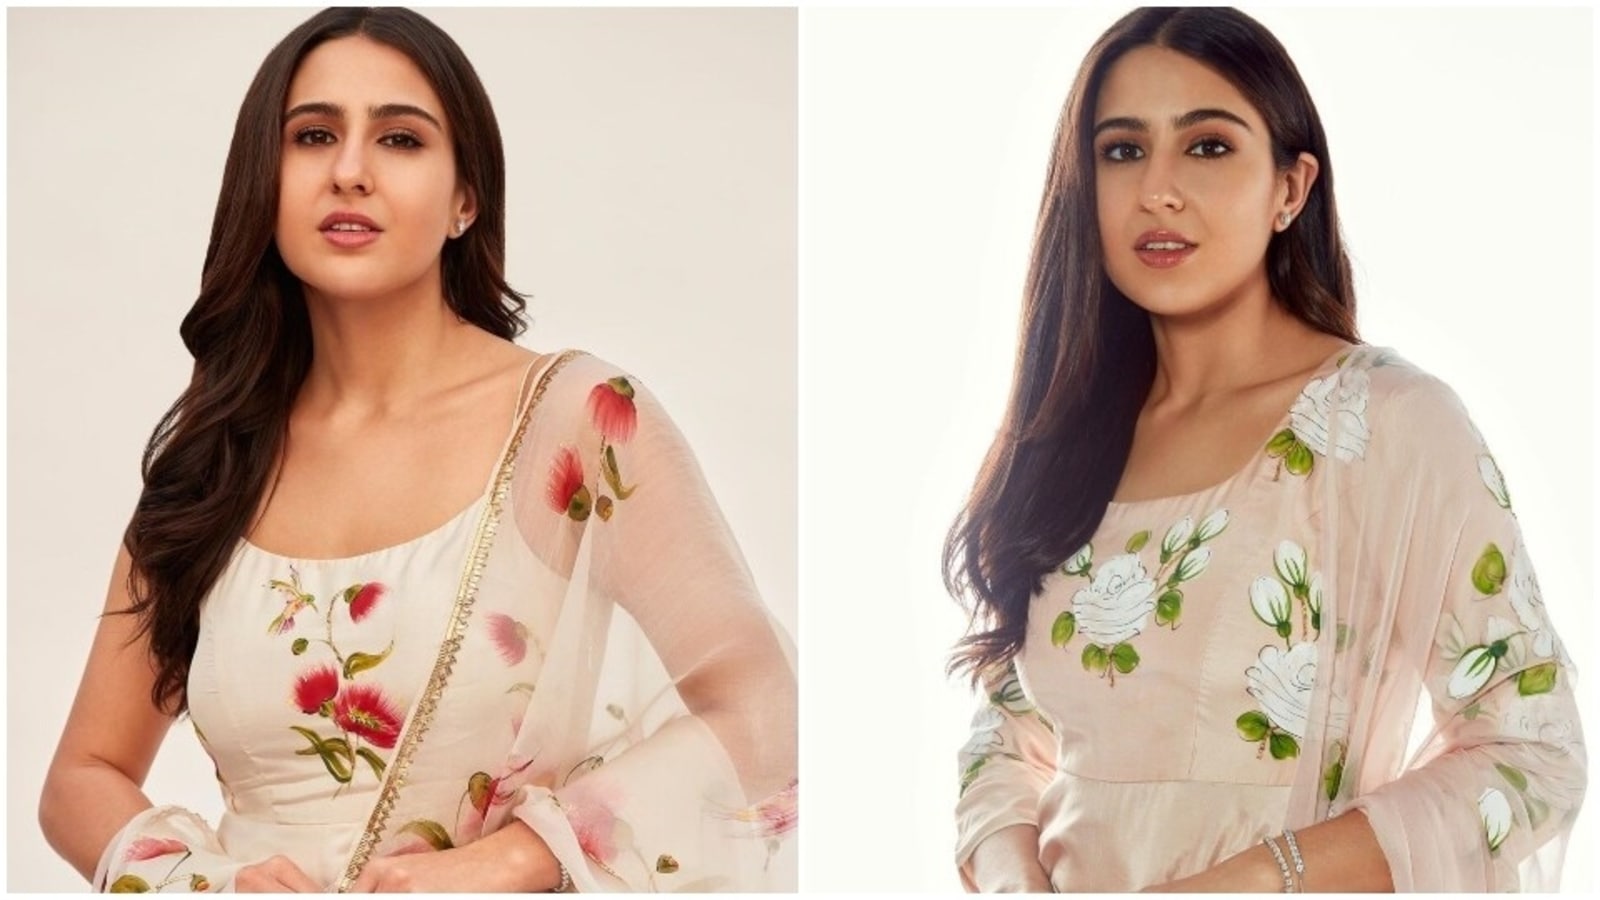 Loved Palak Tiwari's blush-pink ethnic outfit in new pics? Here's how much  it costs - India Today